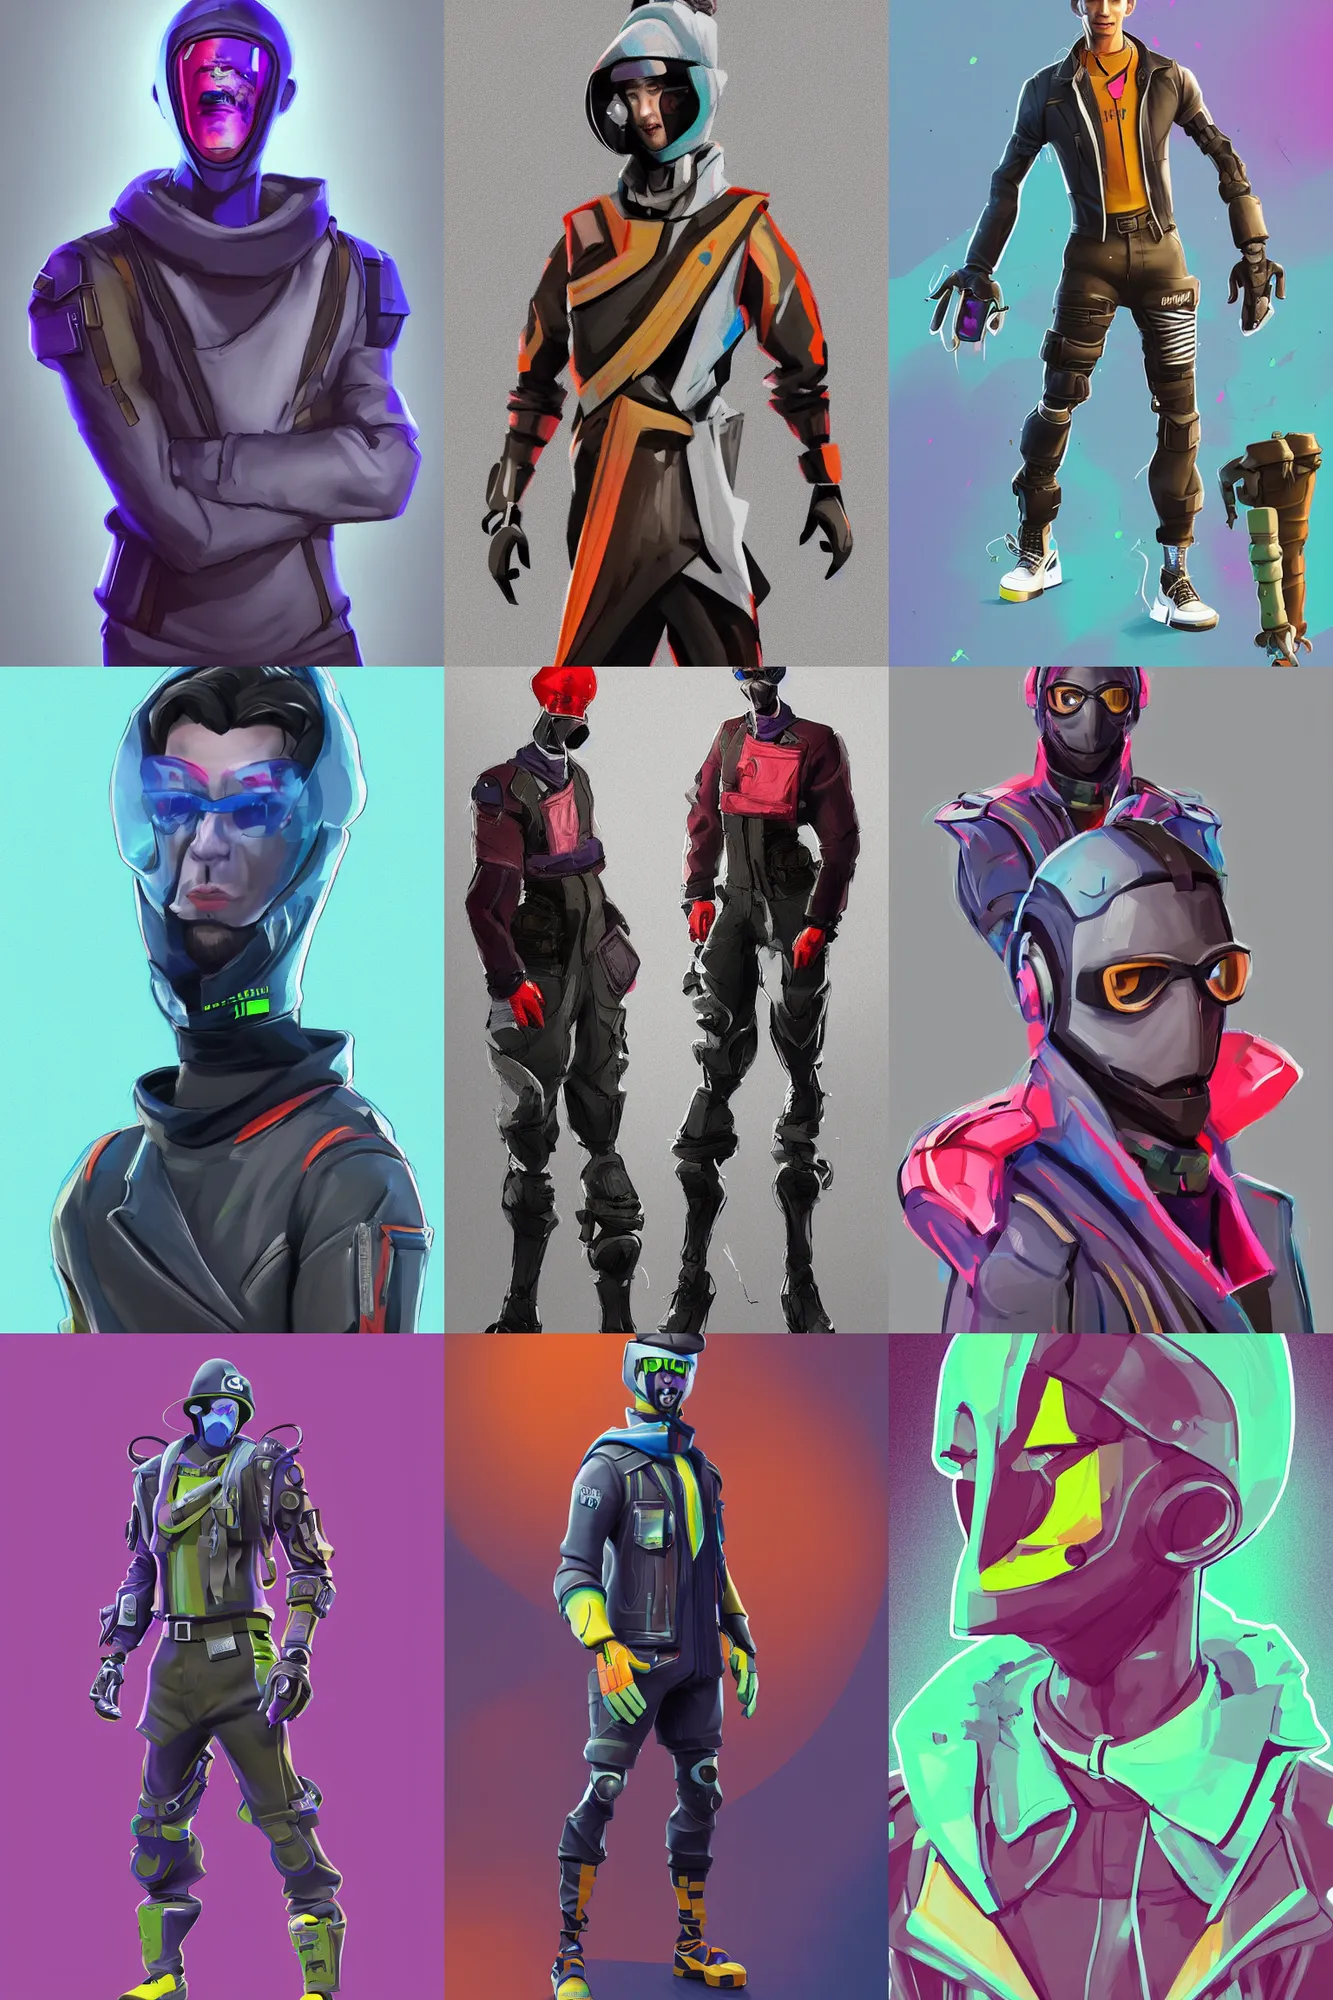 Prompt: a full body concept art portrait digital illustration of a single man dressed in futuristic 90s street clothing with face and body clearly visible by Renaud Galand Chris Gillet and Tim Guo, fortnite, valorant, artstation trending, high quality, happy mood, artstation trending, vibrant colours, no crop, no helmet, entire character, blank background, SFW,